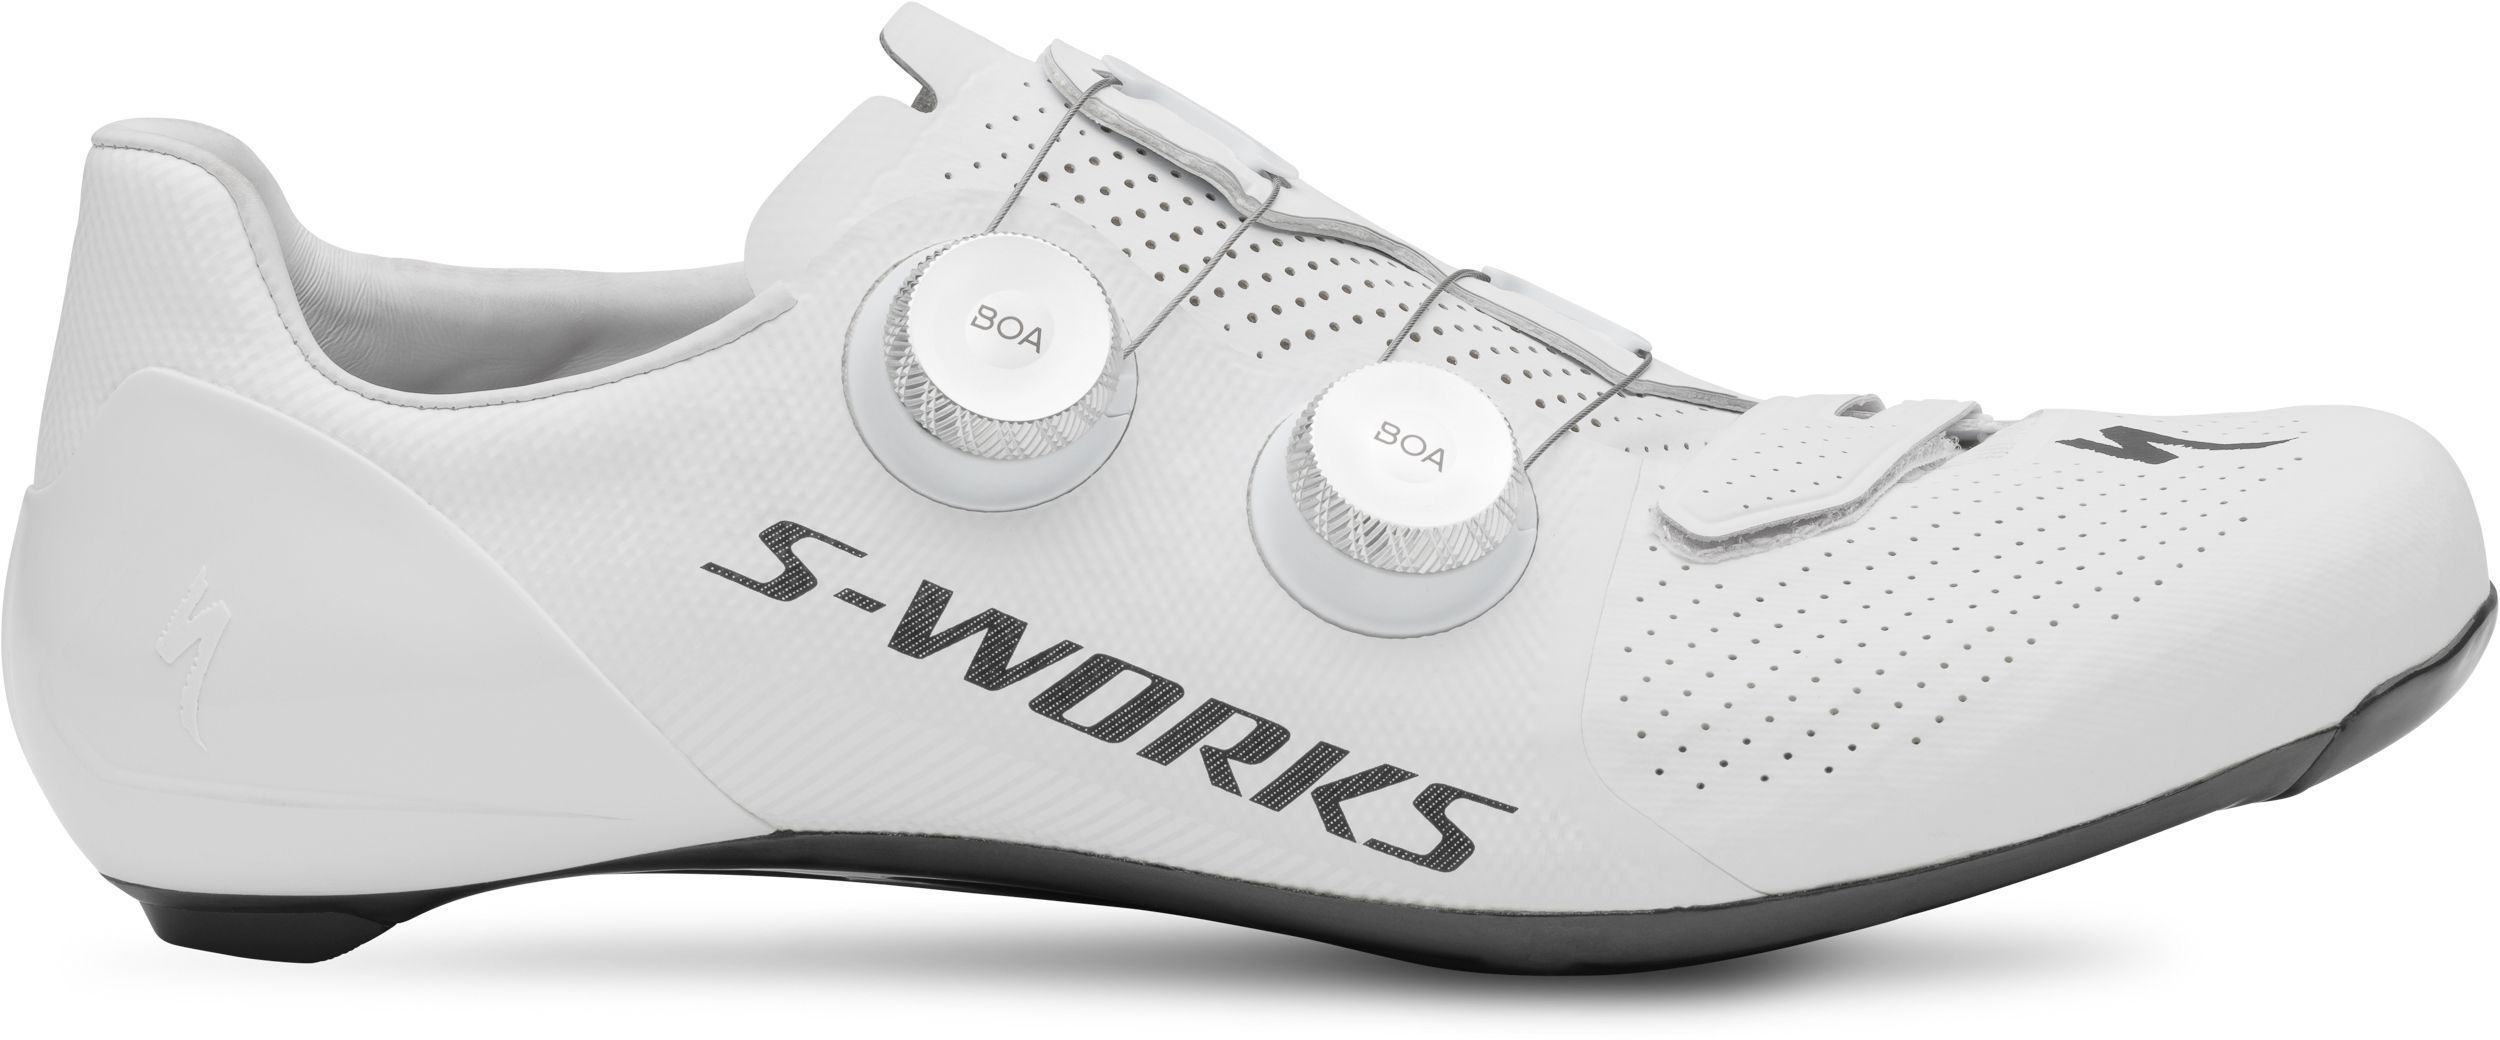 Specialized S-WORKS 7 Road Shoes Size 42 White 2020 (ex Demo With